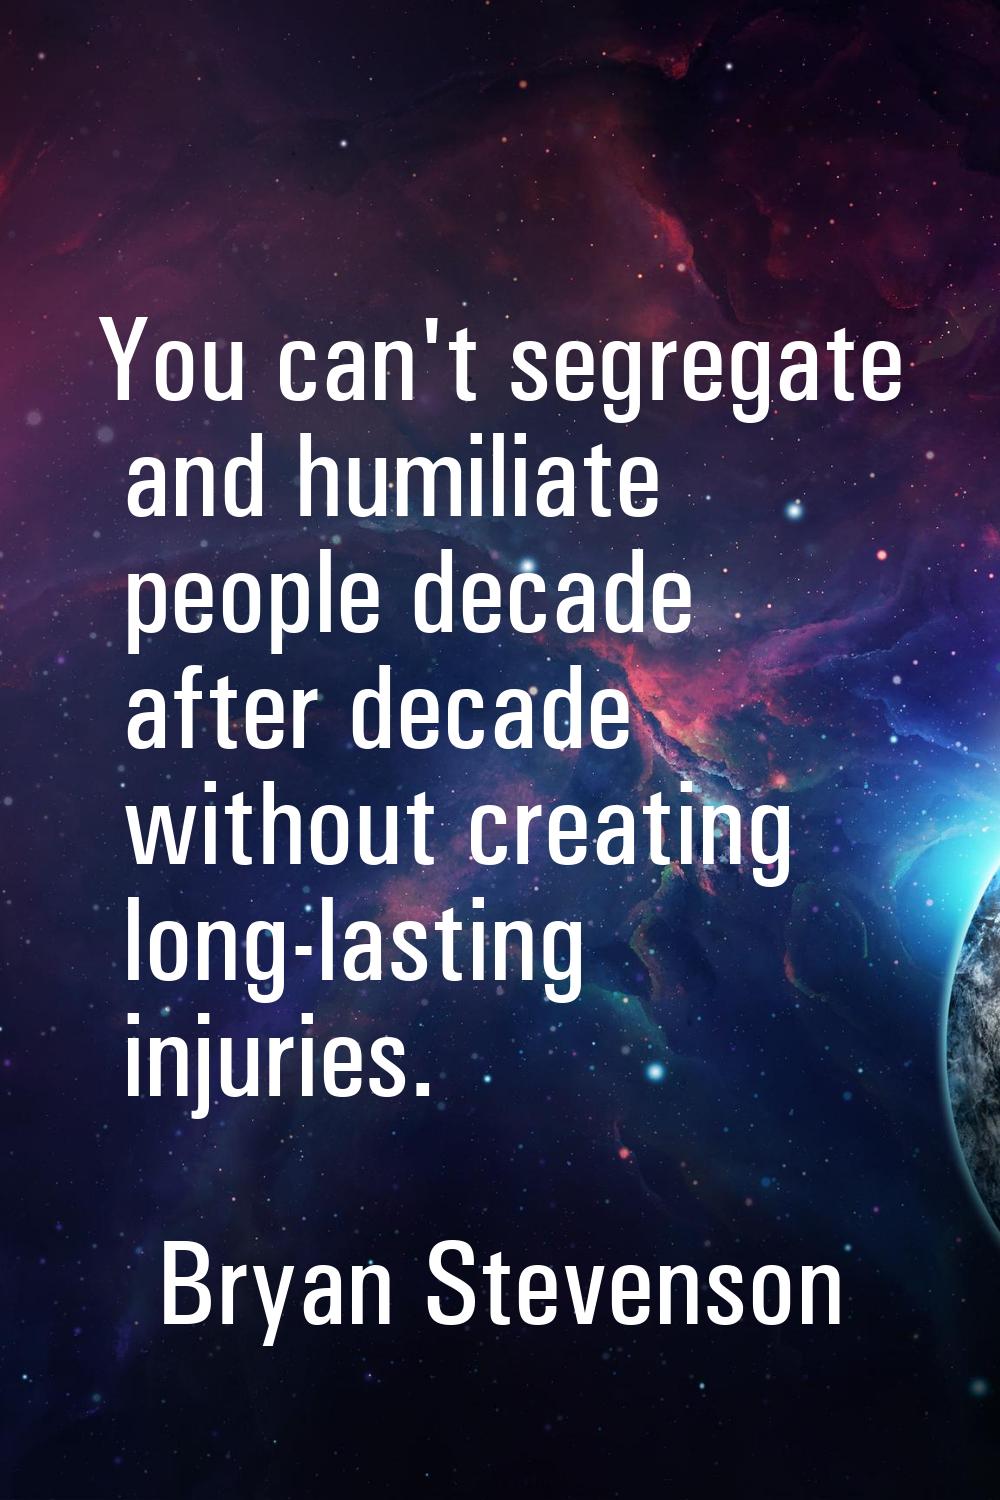 You can't segregate and humiliate people decade after decade without creating long-lasting injuries